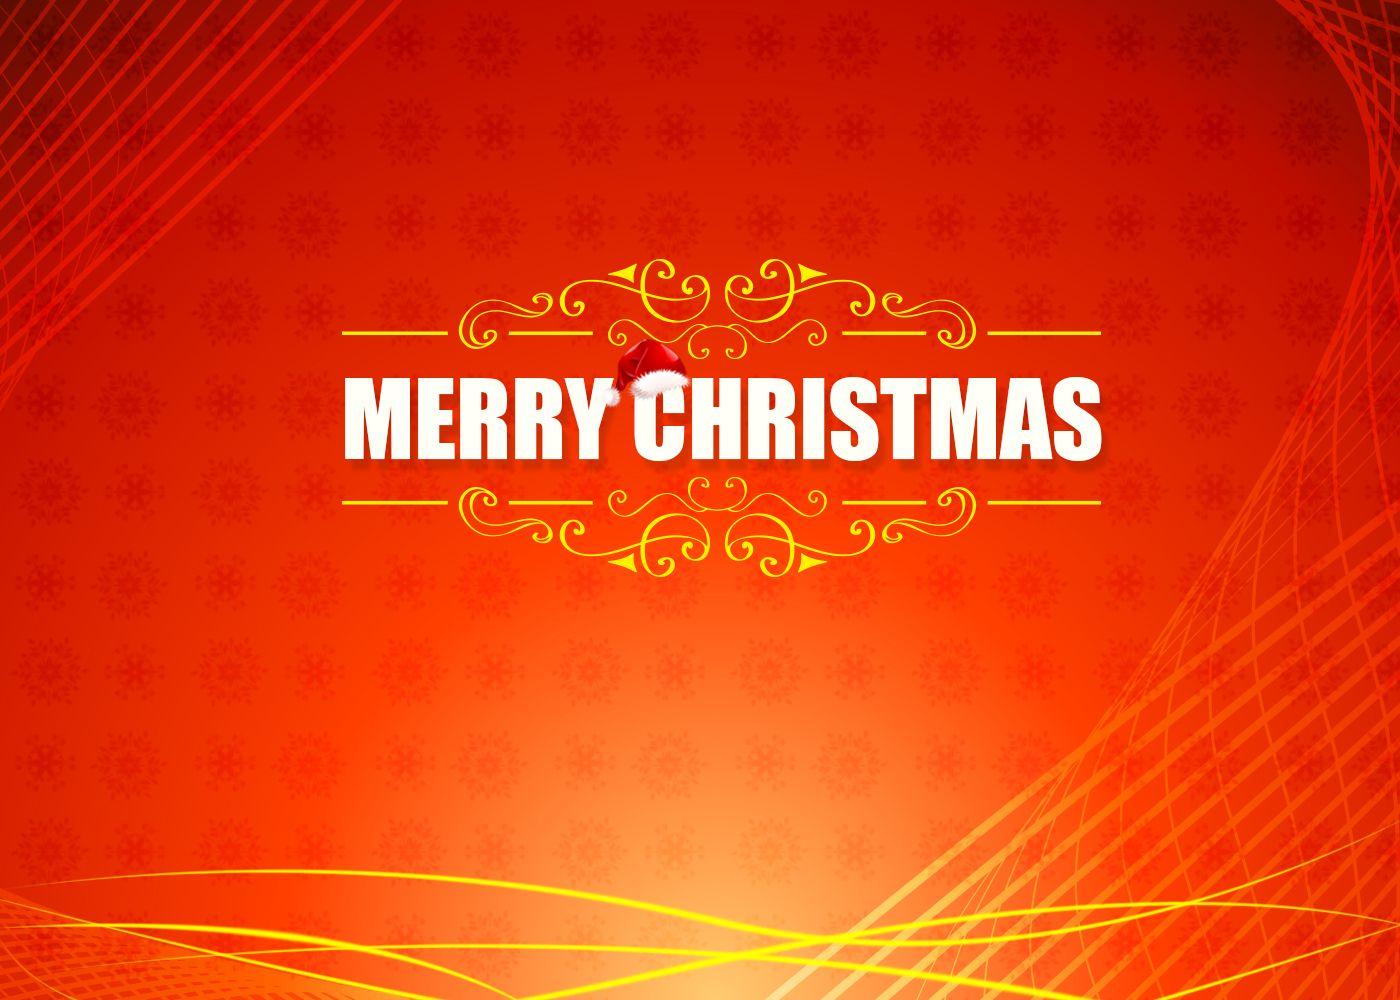 Free Merry Christmas Wallpaper and Desktop Background Celebration about Christmas